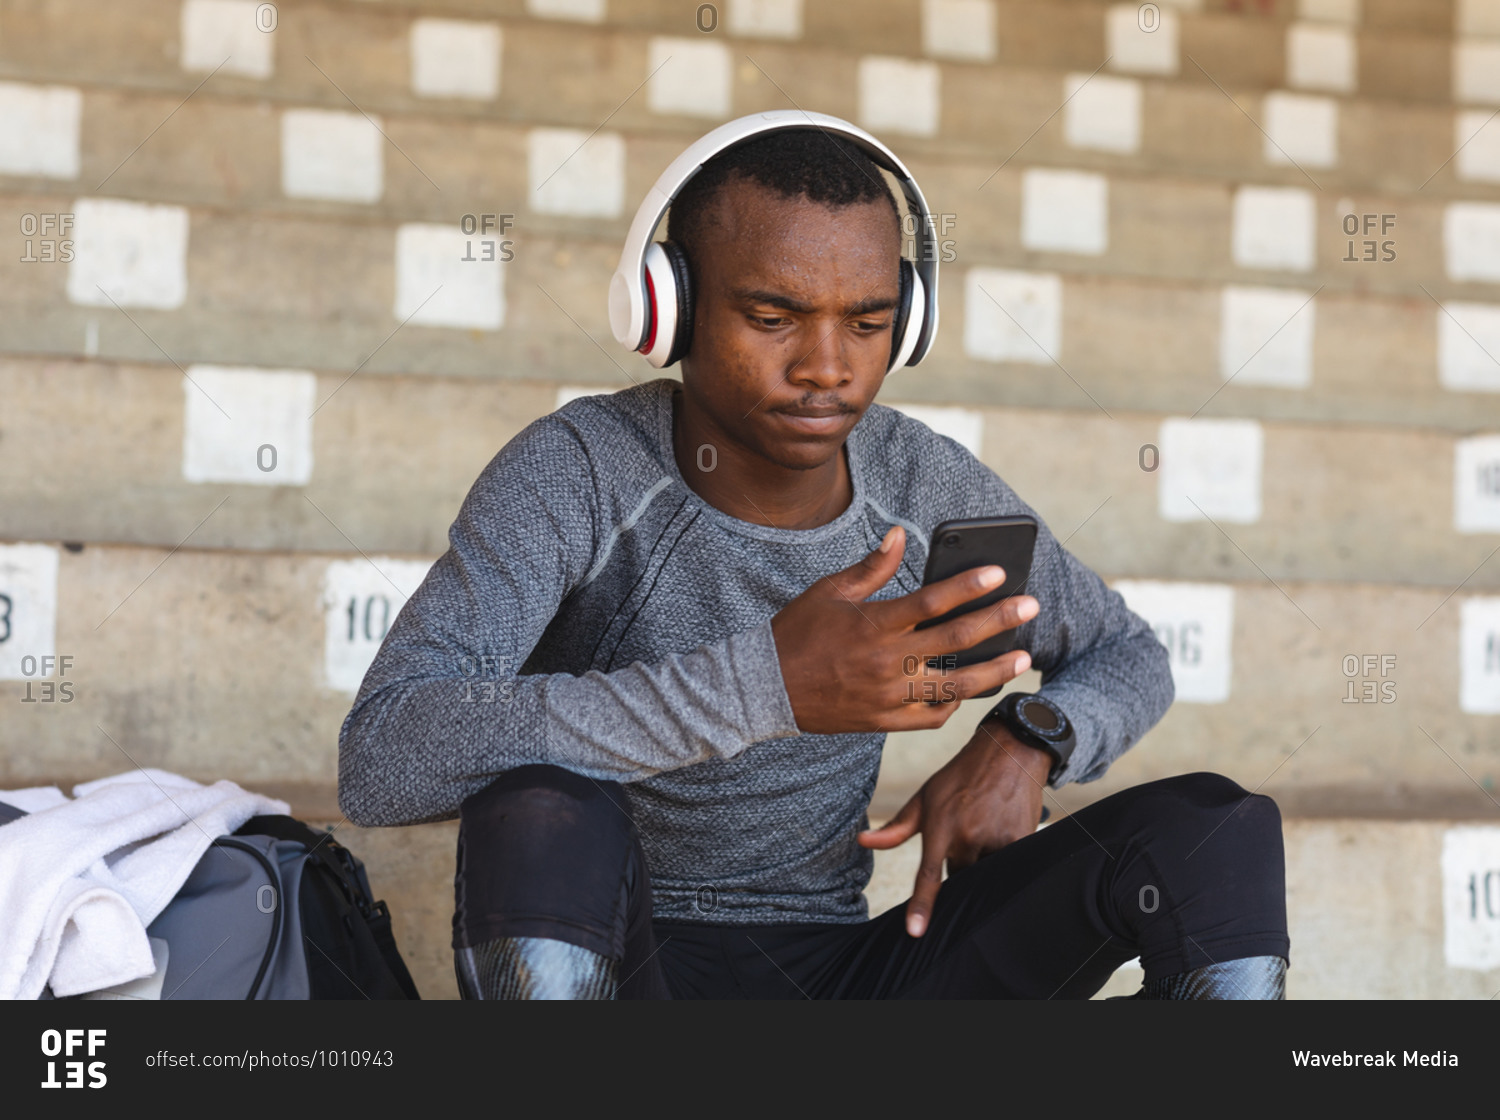 Fit, mixed race disabled male athlete at an outdoor sports stadium, sitting in the stands wearing headphones using smartphone wearing running blades. Disability athletics sport training.